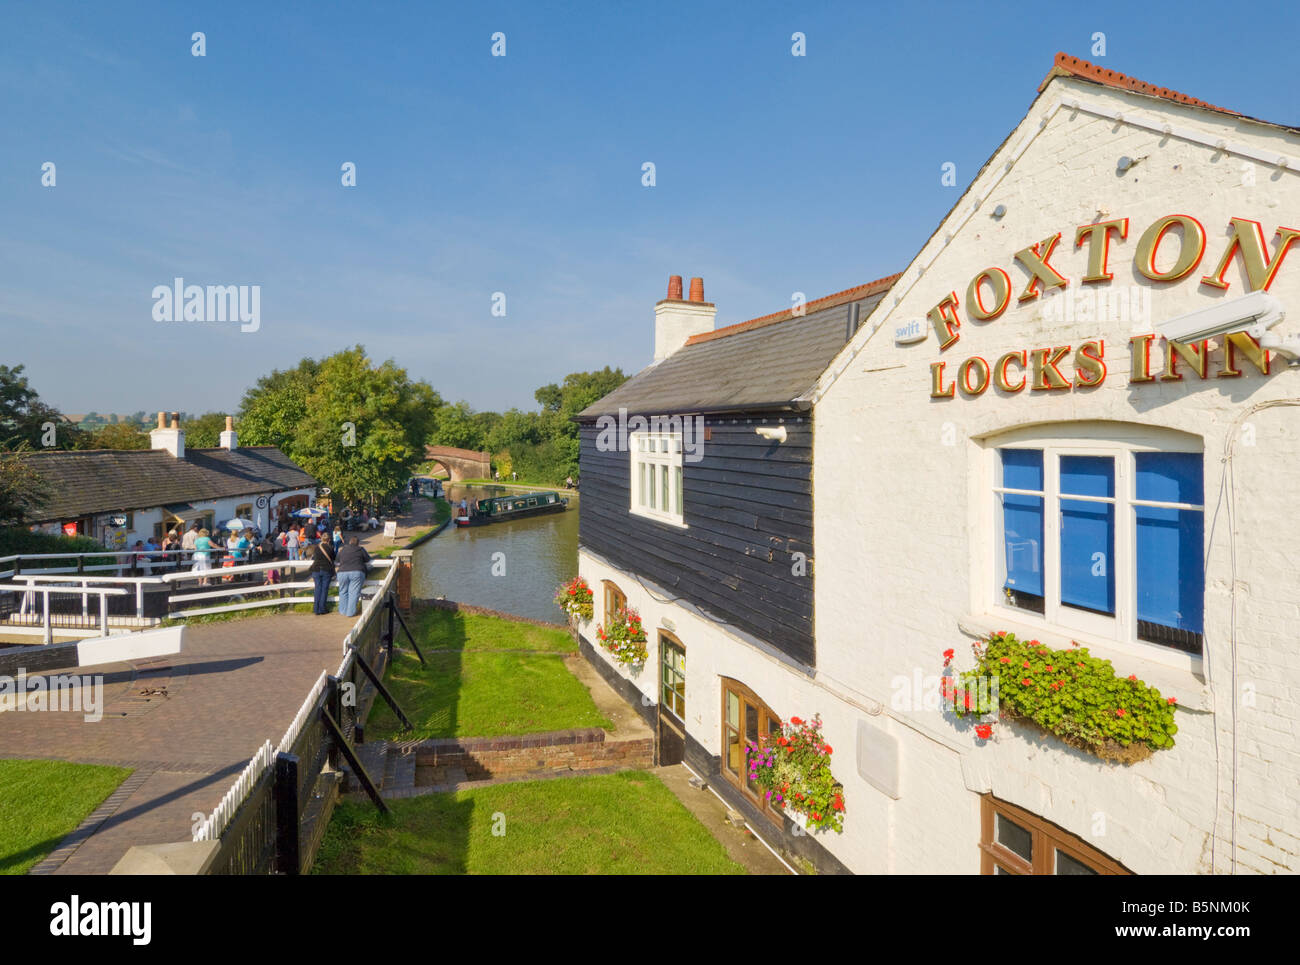 Foxton locks inn with barges and narrowboats Foxton Leicestershire England UK GB EU Europe Stock Photo